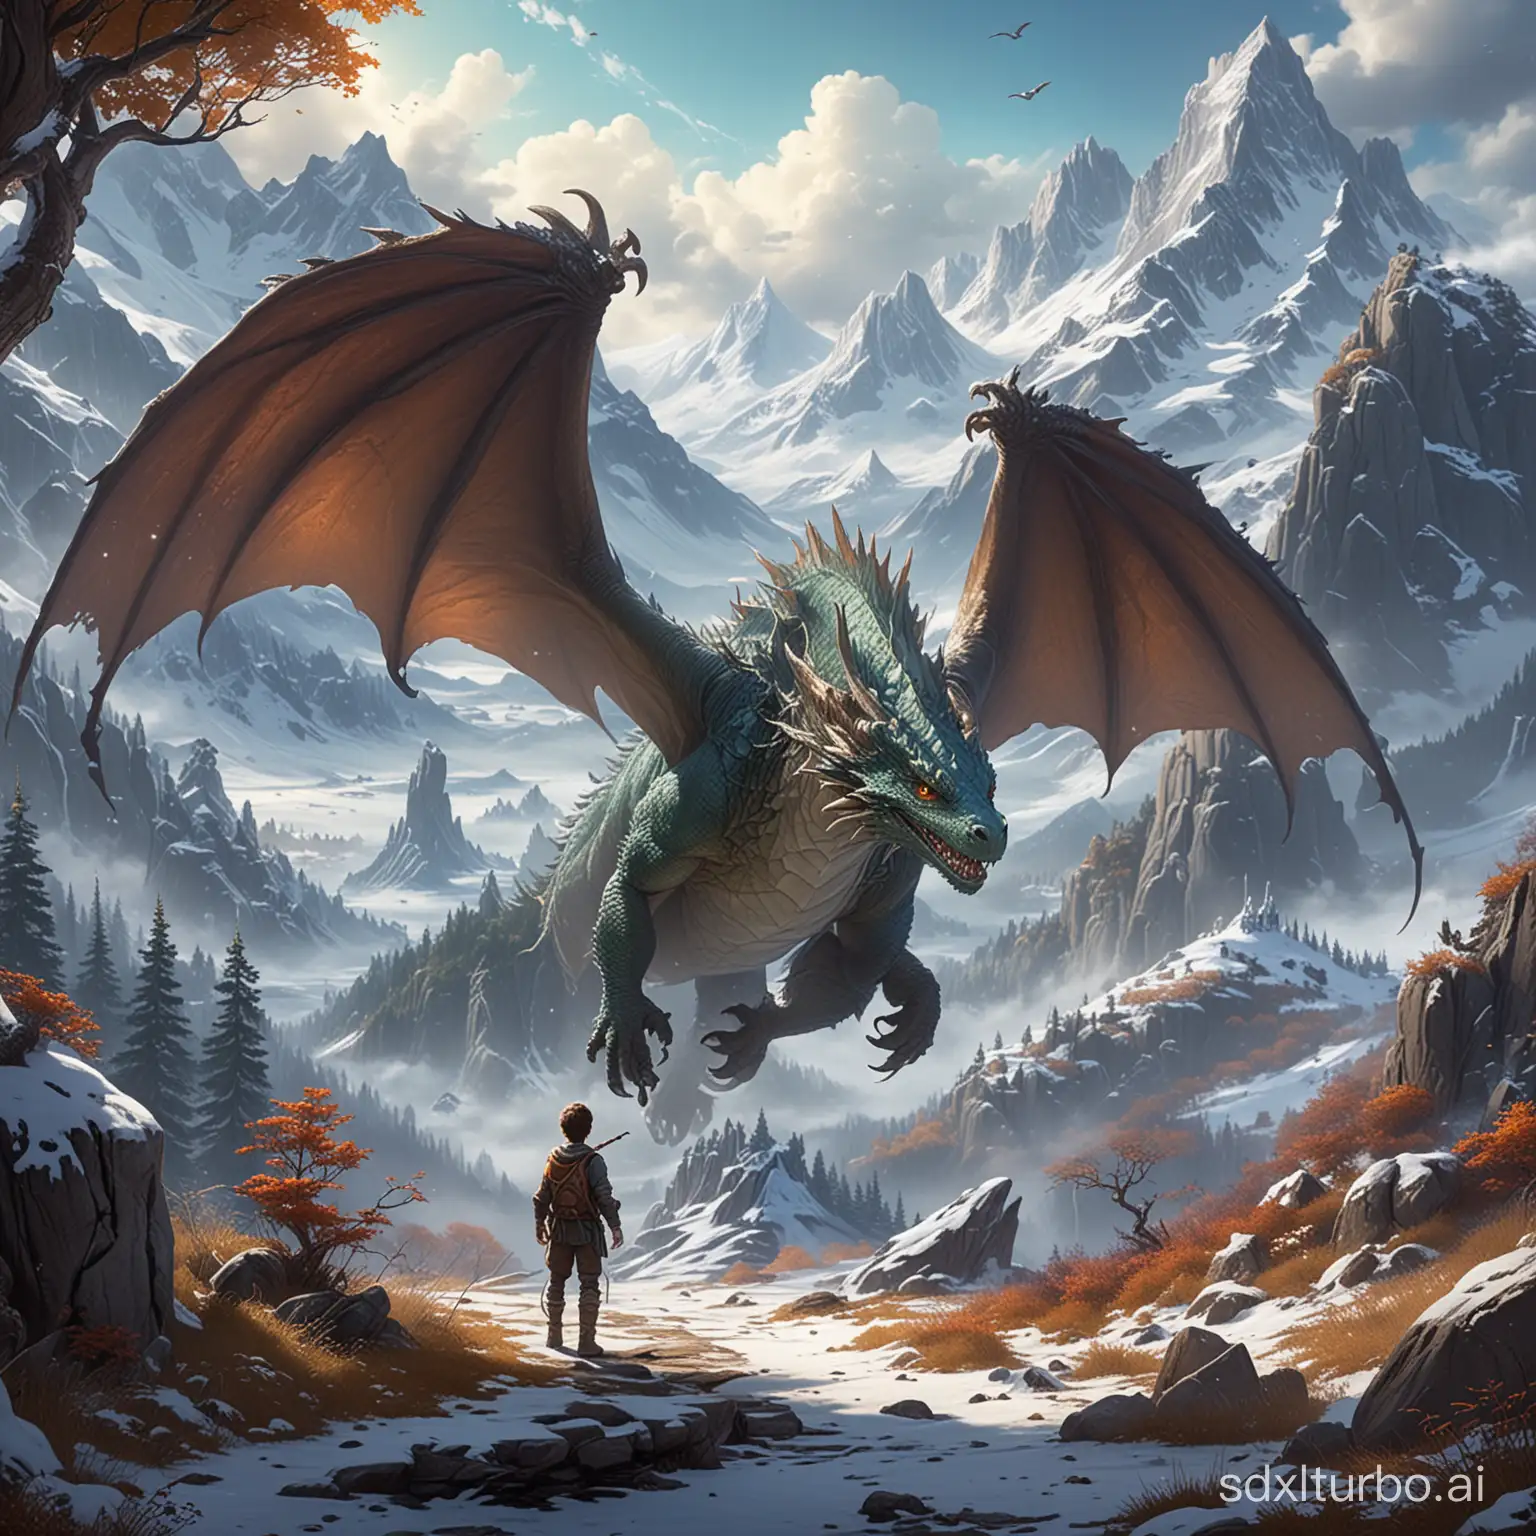 Scenario of A magical and mysterious world full of fantastic creatures and impressive landscapes, such as enchanted forests and snowy mountains. with a boy and a tiny dragon as a friend